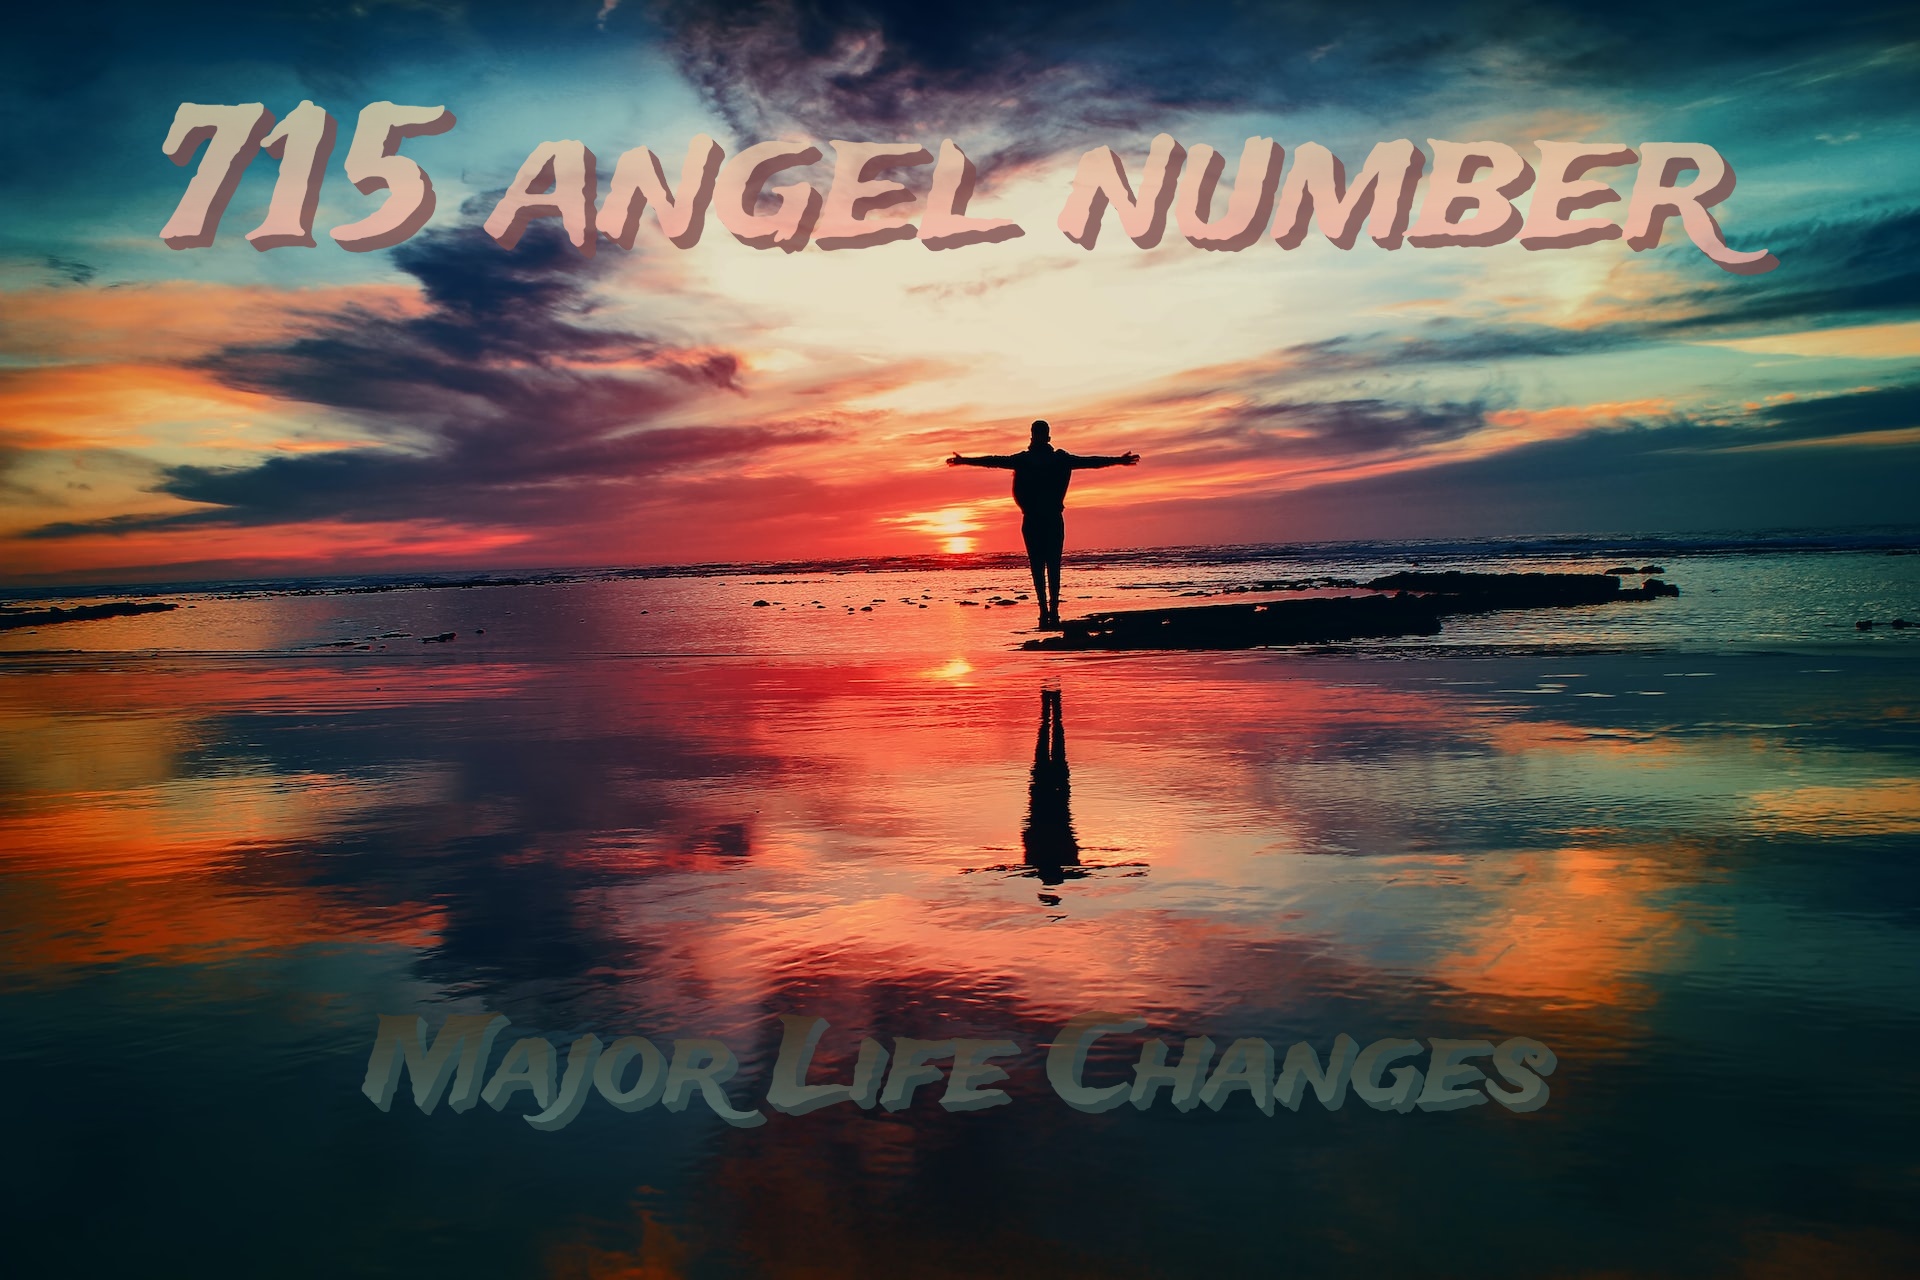 715 Angel Number Meaning - Major Life Changes